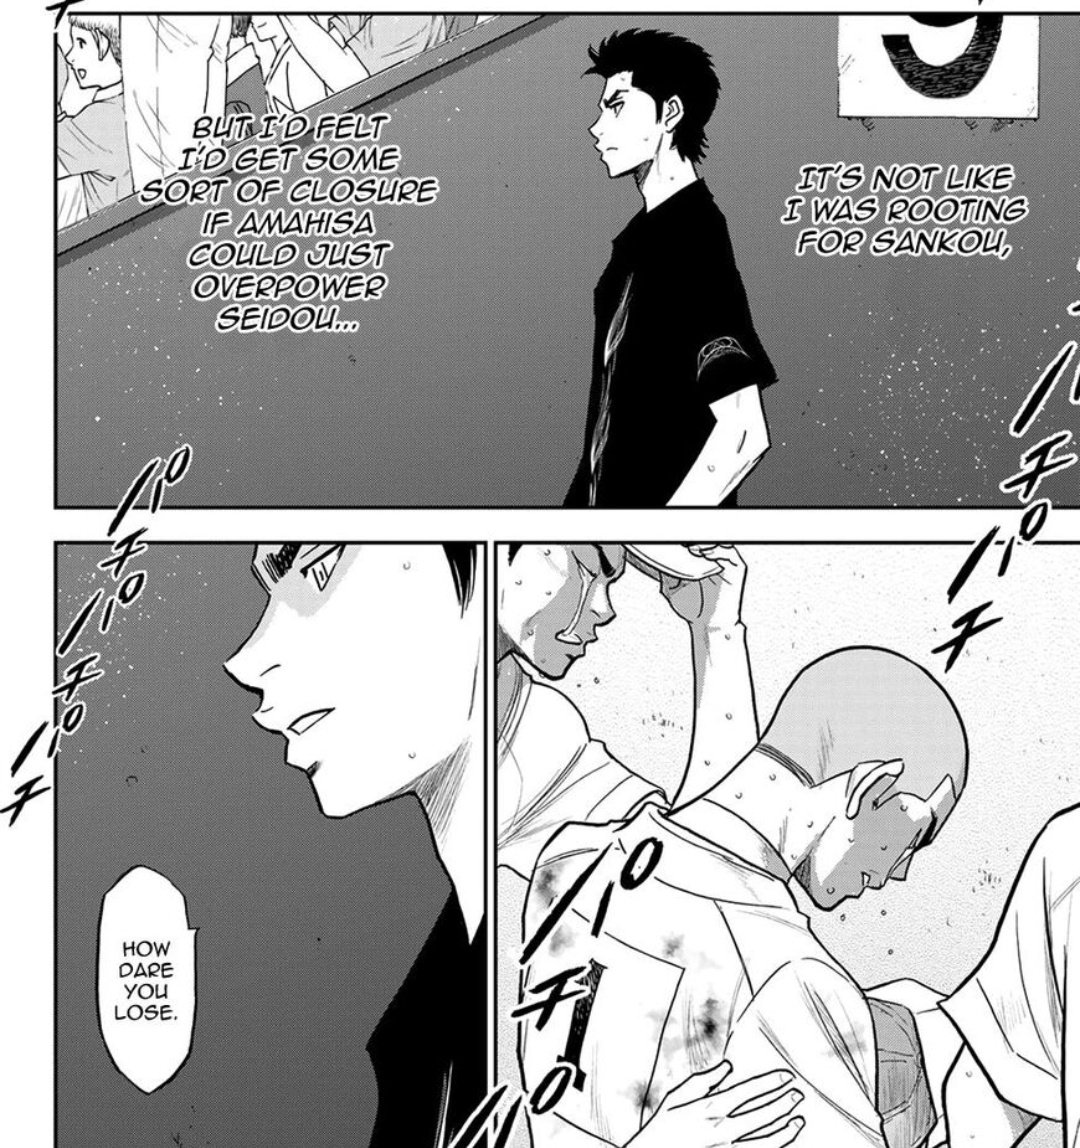 If takes very little for me to hop on a ship, for amahisa x sanada, this scene is enough. 